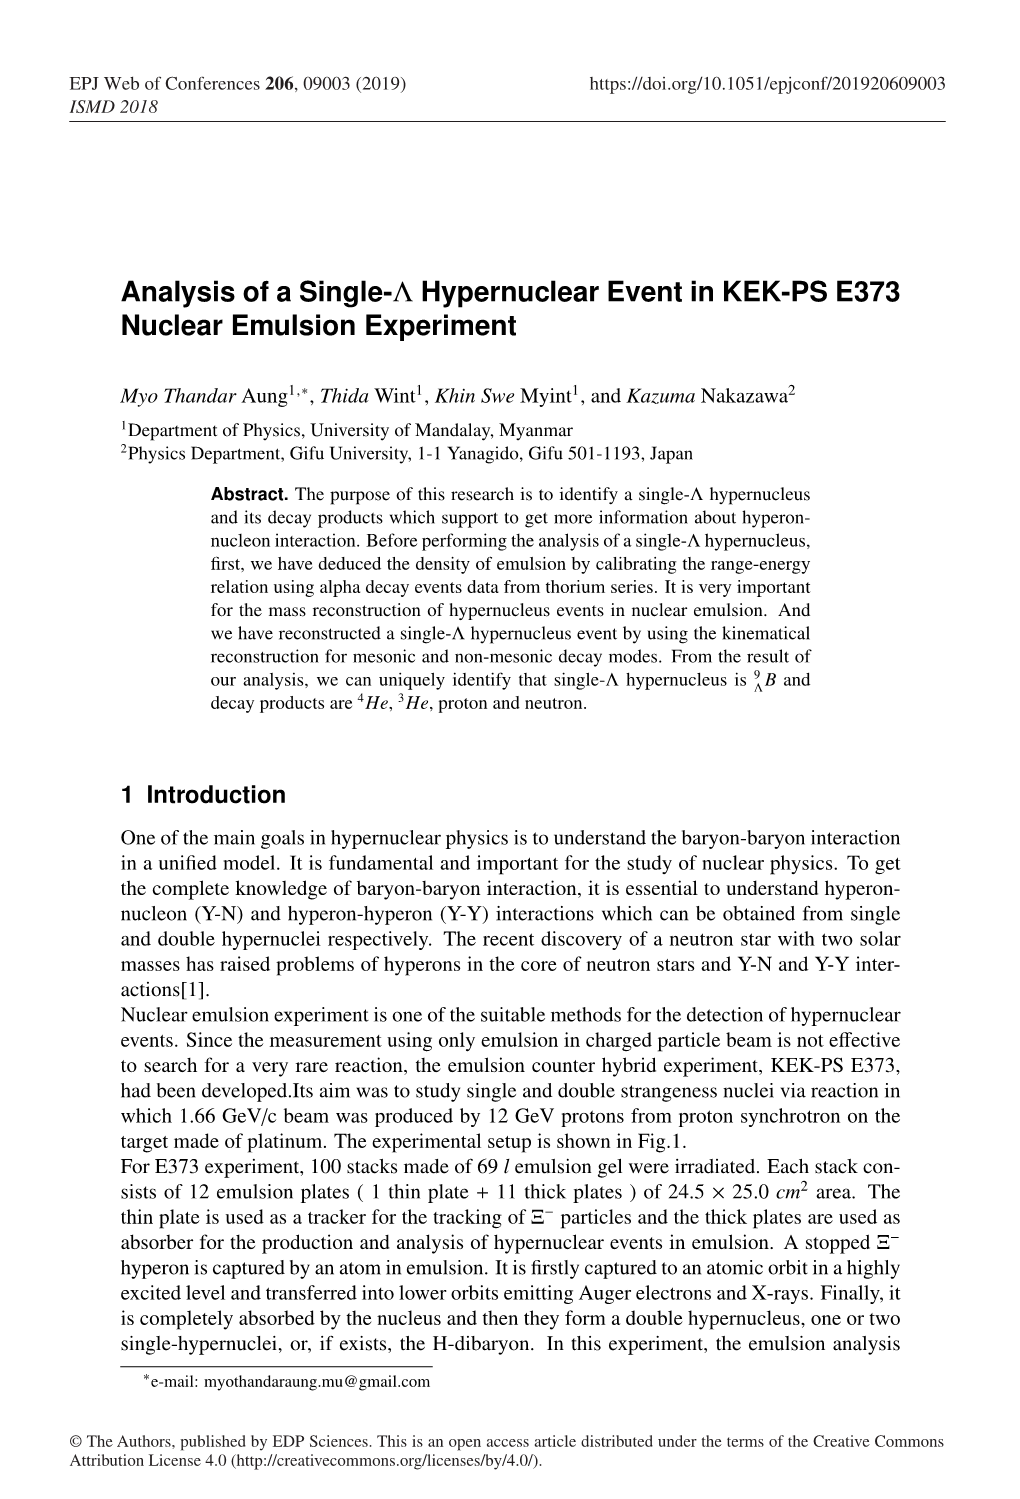 Analysis of a Single-Λ Hypernuclear Event in KEK-PS E373 Nuclear Emulsion Experiment